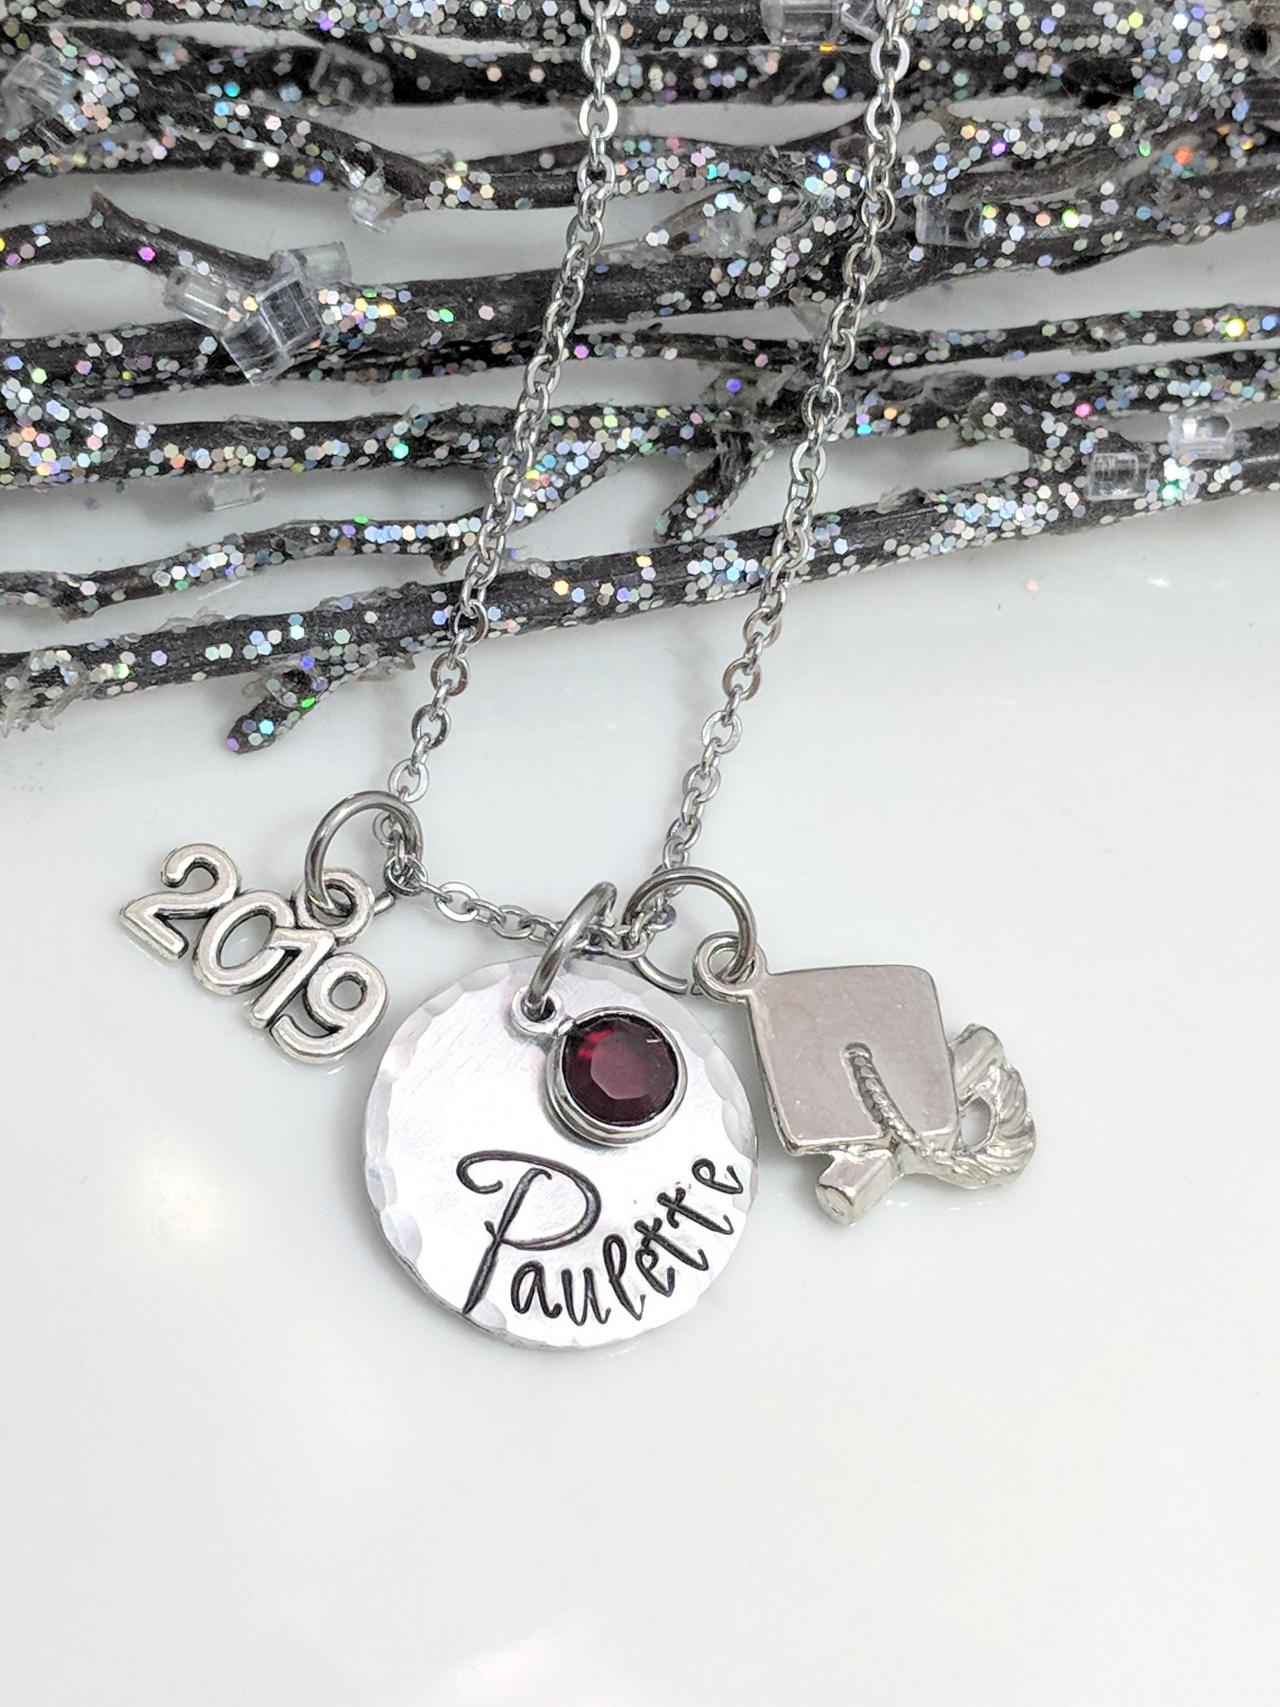 Hand Stamped Personalized Graduation Necklace - Class Of 2019 - High School Graduation Gift - Graduation Gift - Hand Stamped Graduation Jewelry -